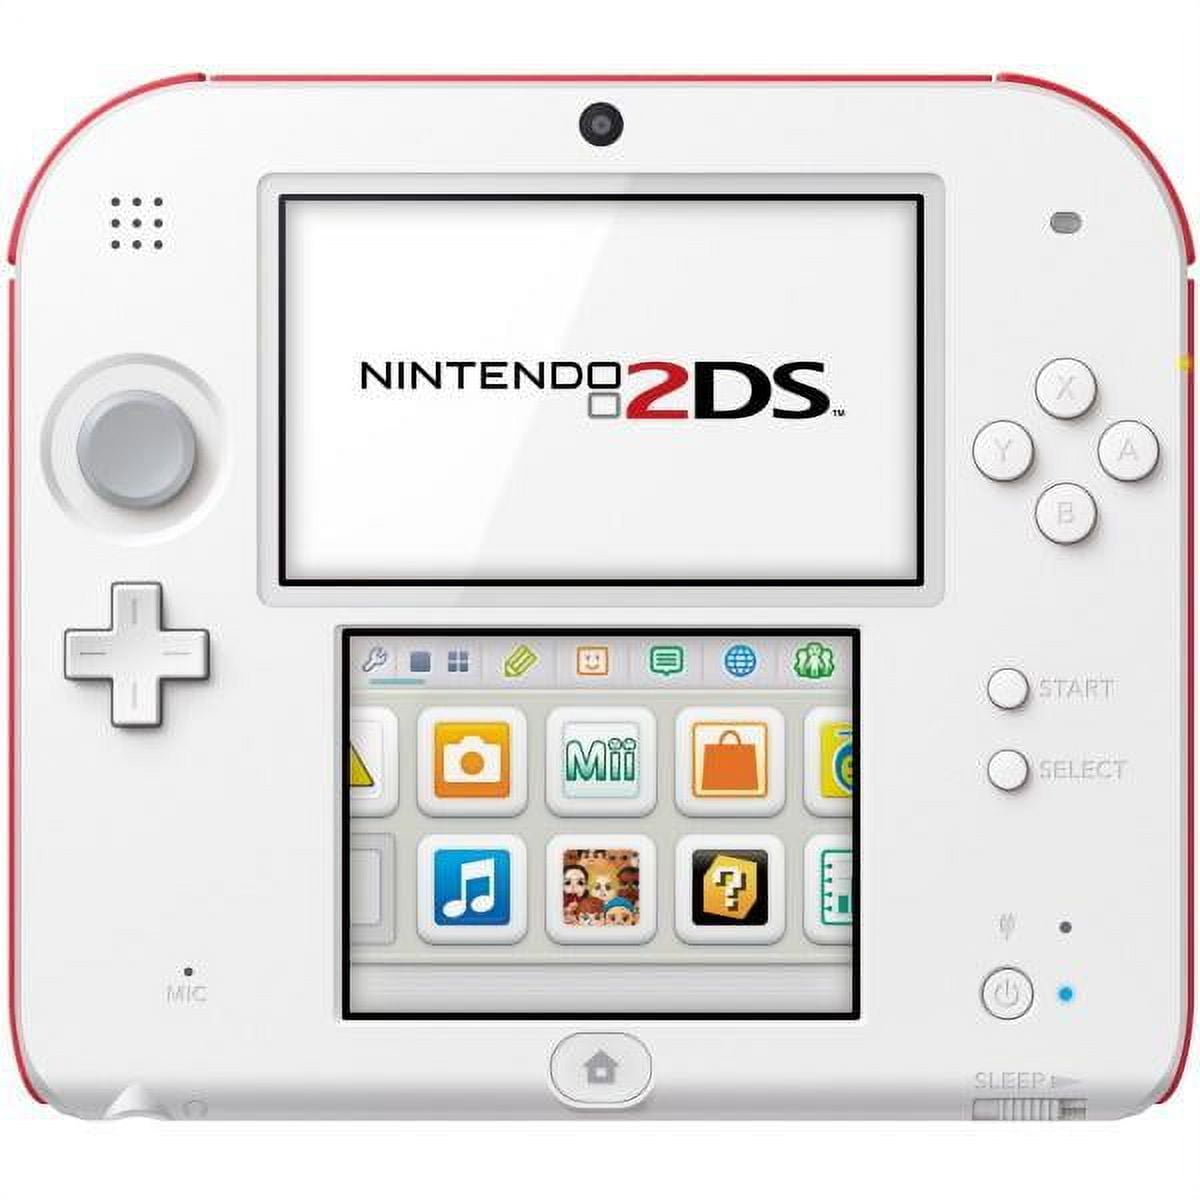 Nintendo 2DS Console - Red + White [Nintendo 2DS System]